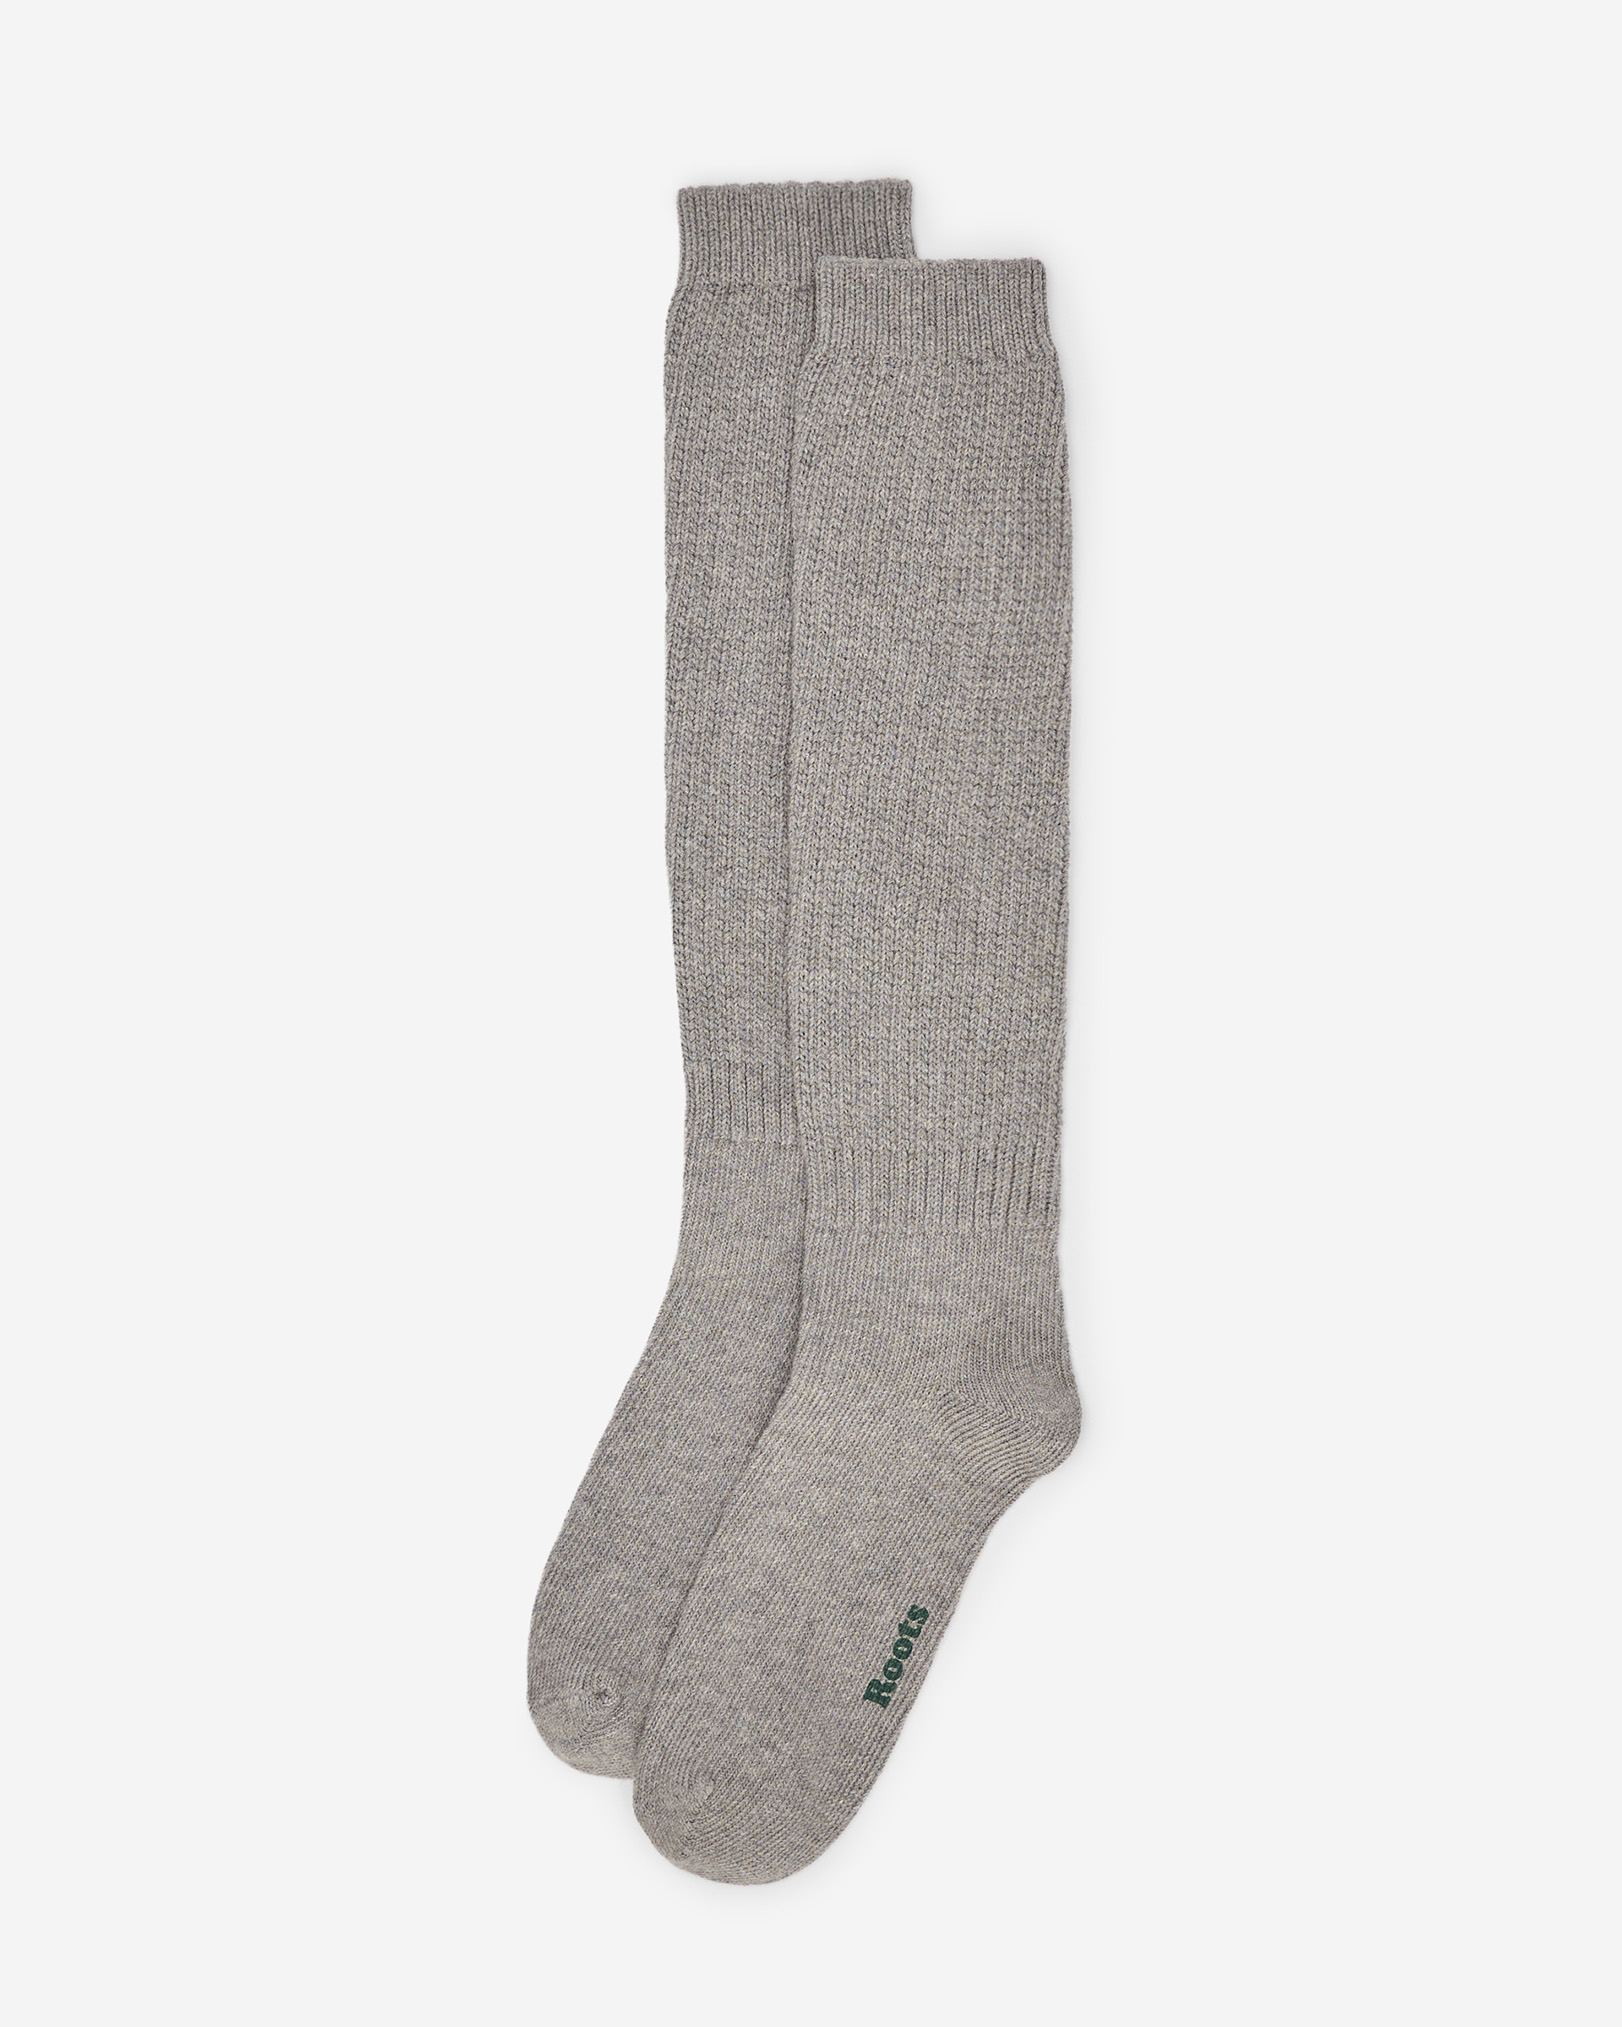 Roots Women's Warm-Up Slouch Sock in Heather Grey